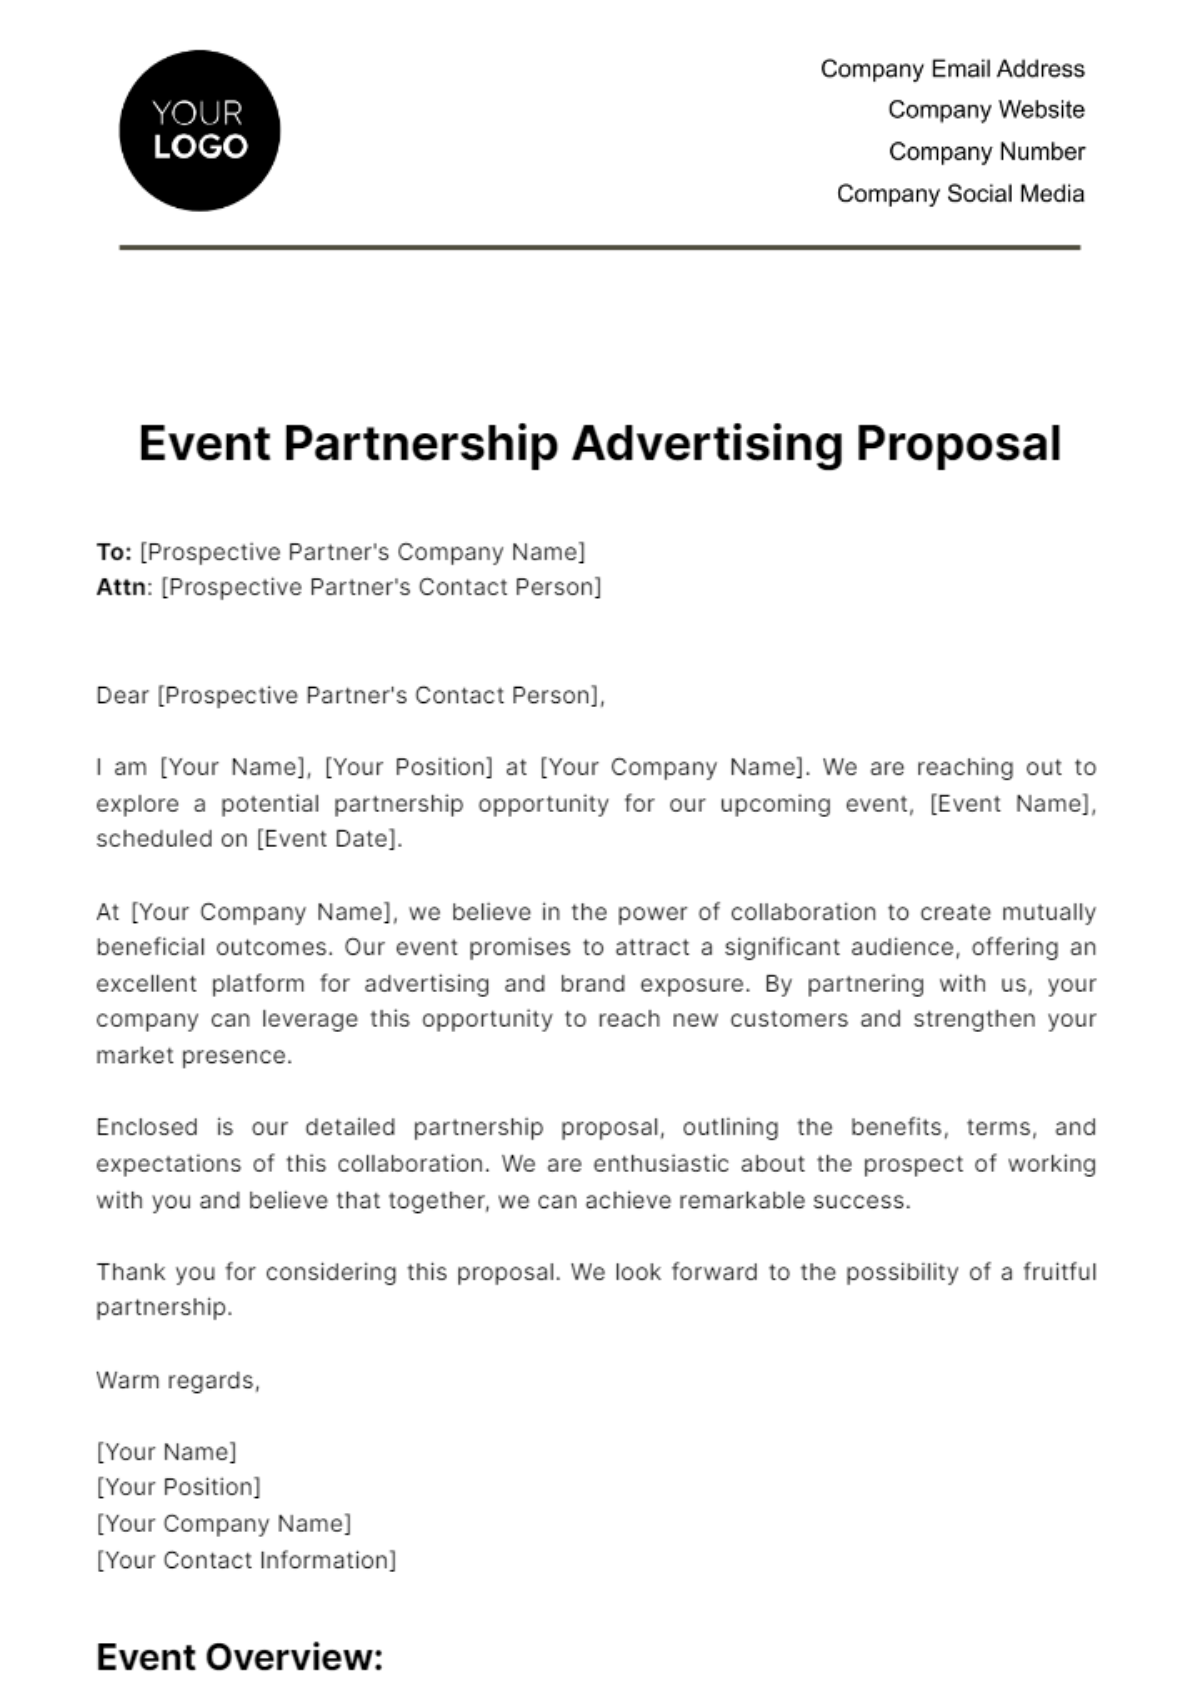 Free Event Partnership Advertising Proposal Template